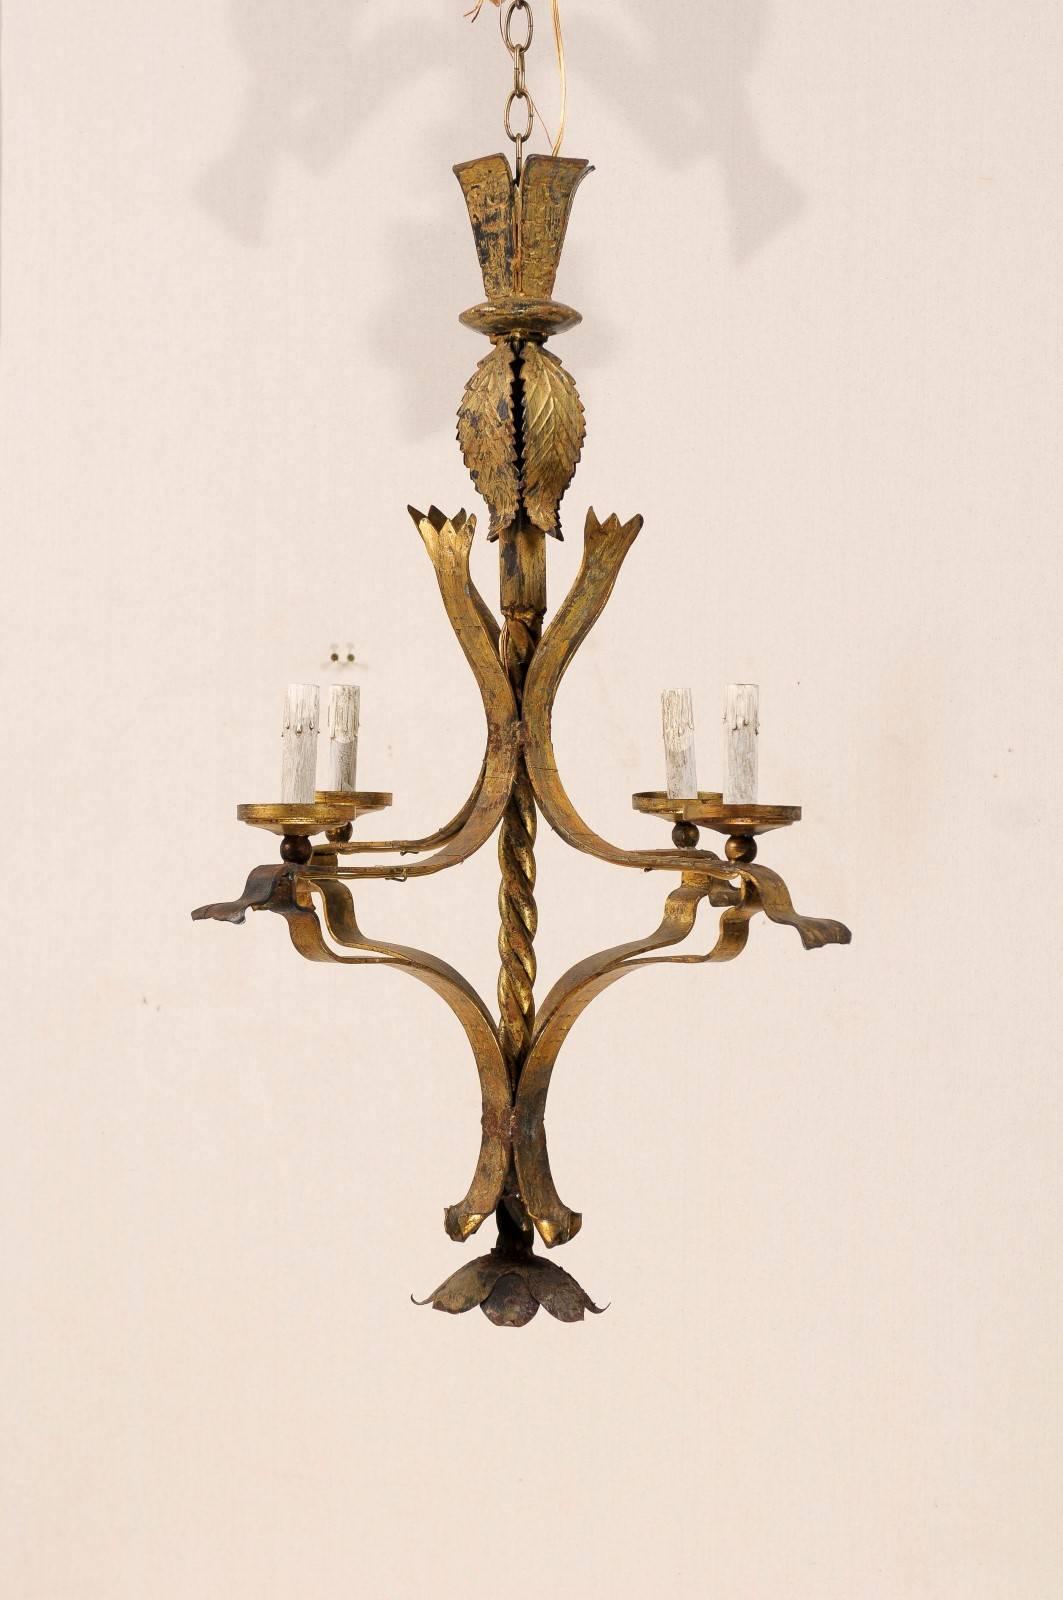 A French Vintage Gilt Iron Four-Light Chandelier with Floral Motif Finial 1